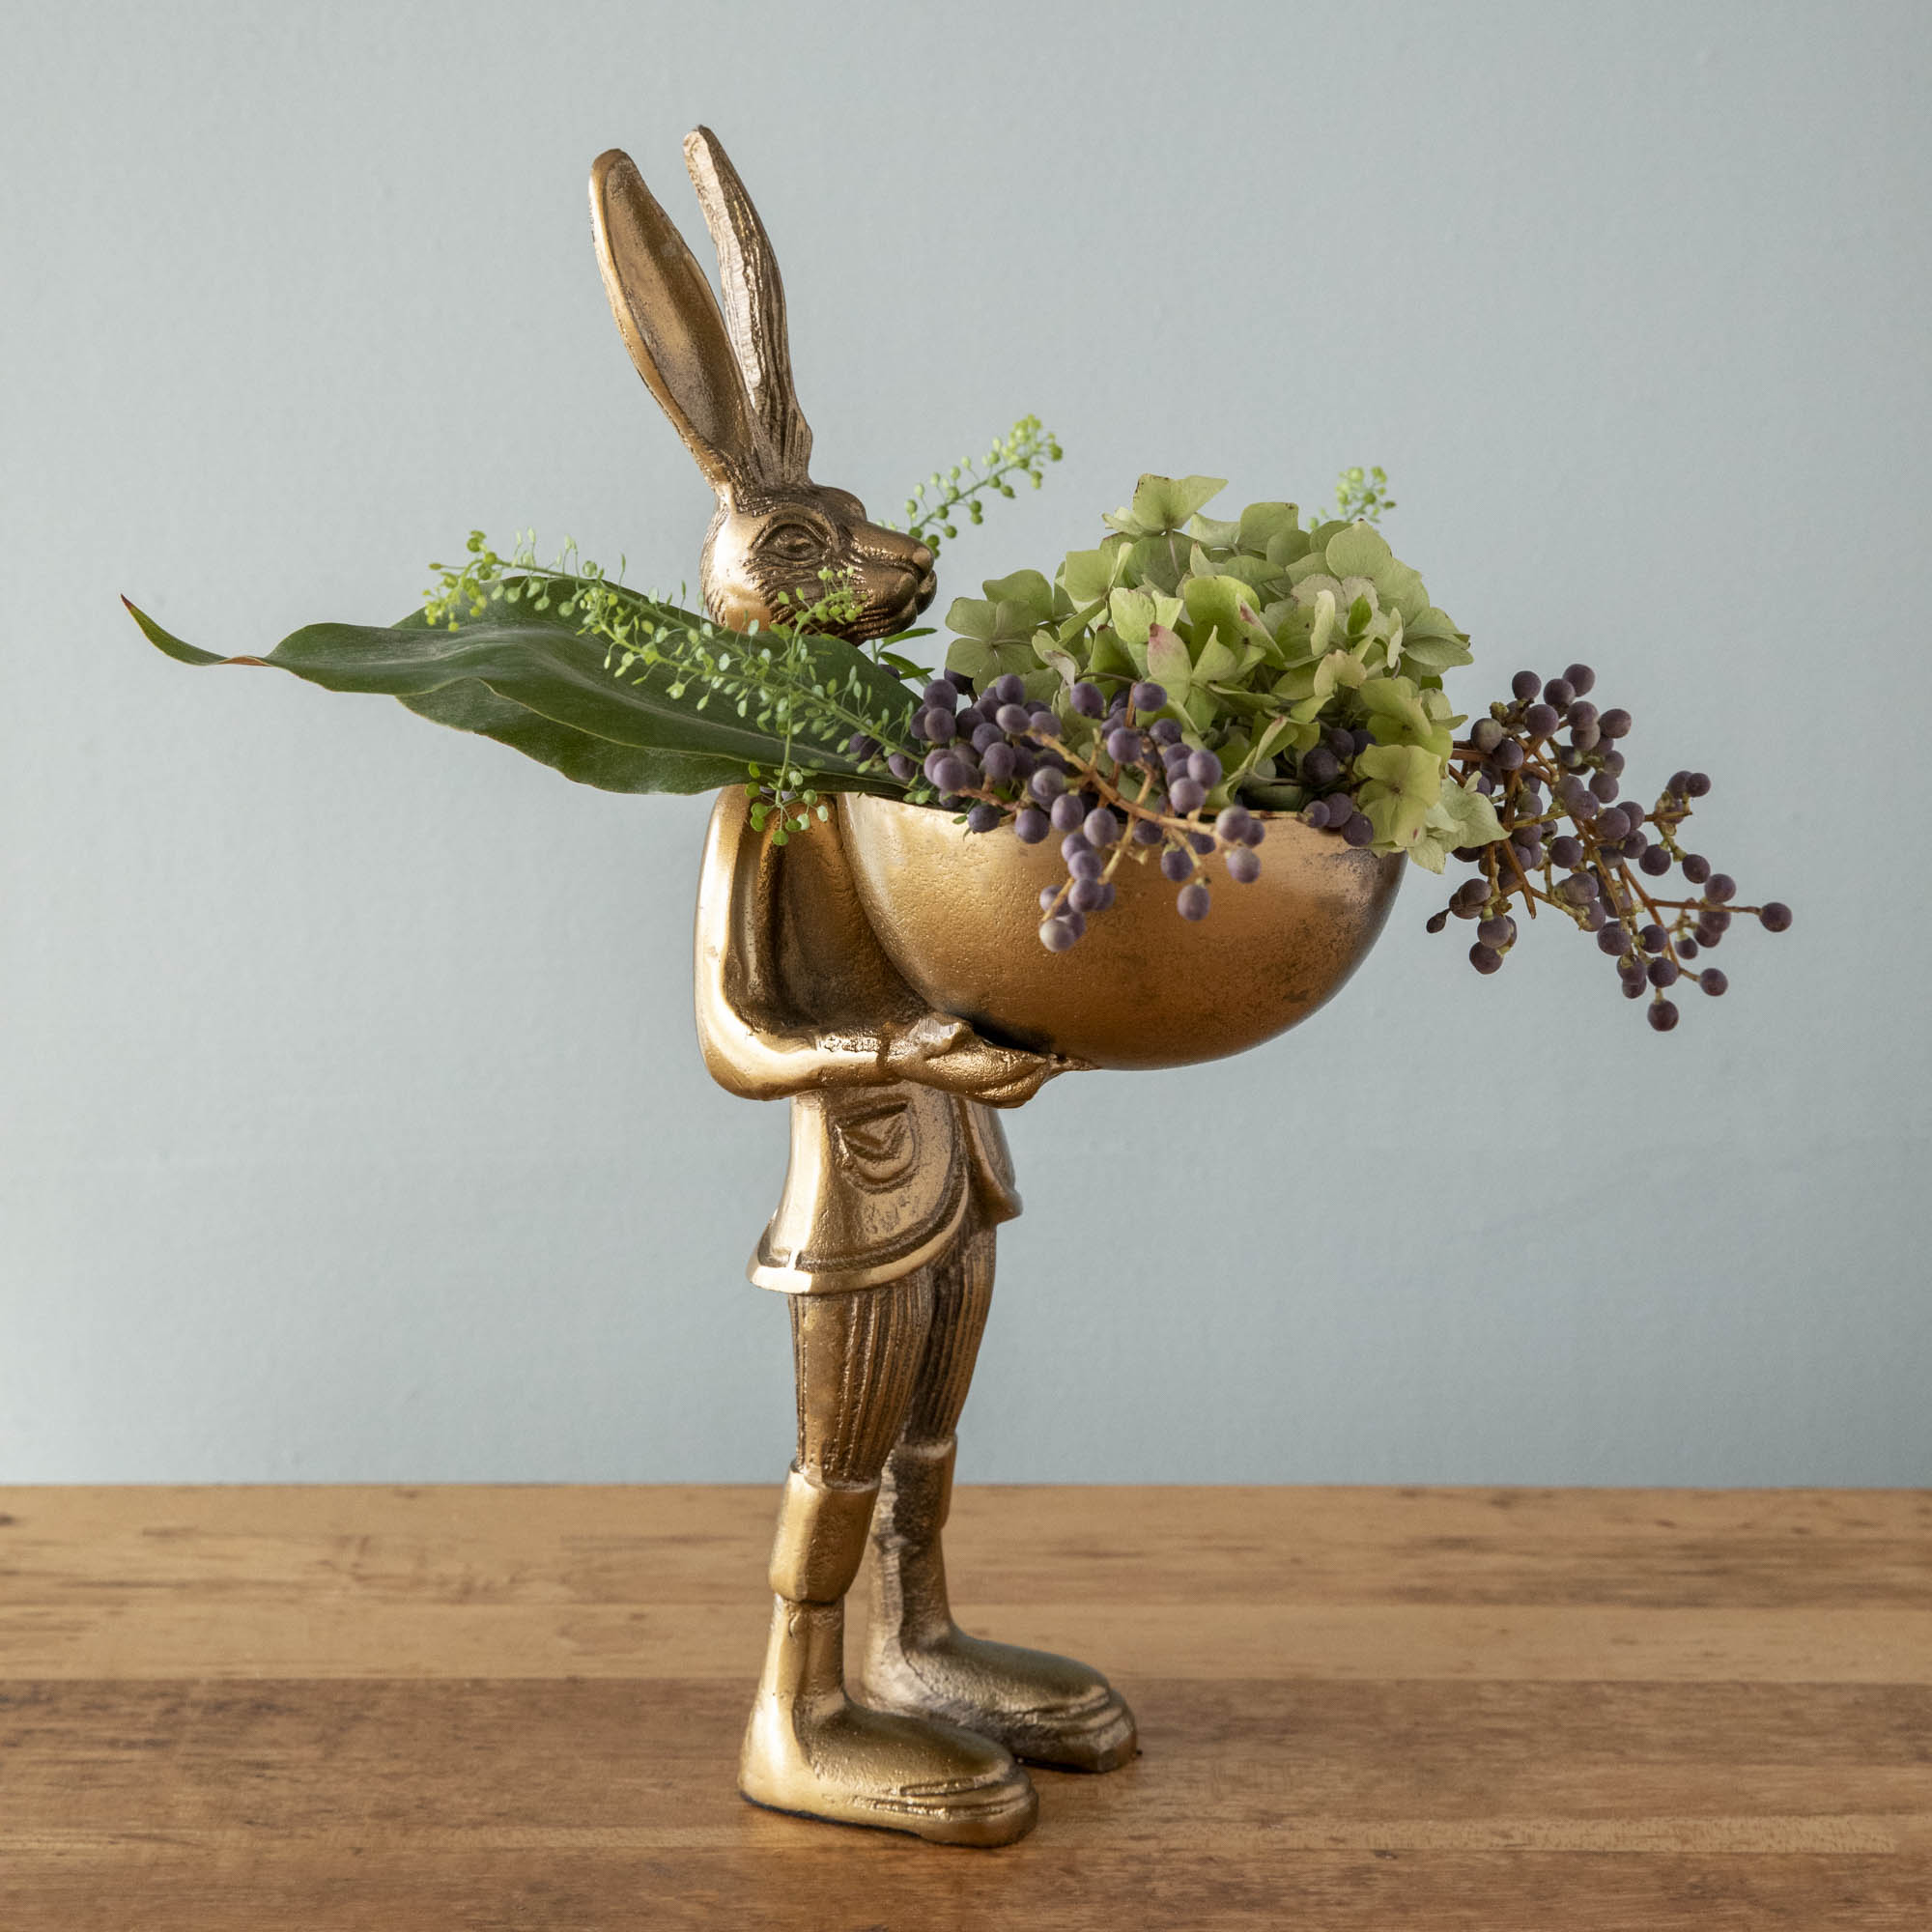 A well-dressed Accent Decor standing hare holding a round dish of plants, called the Hare Dishstand.